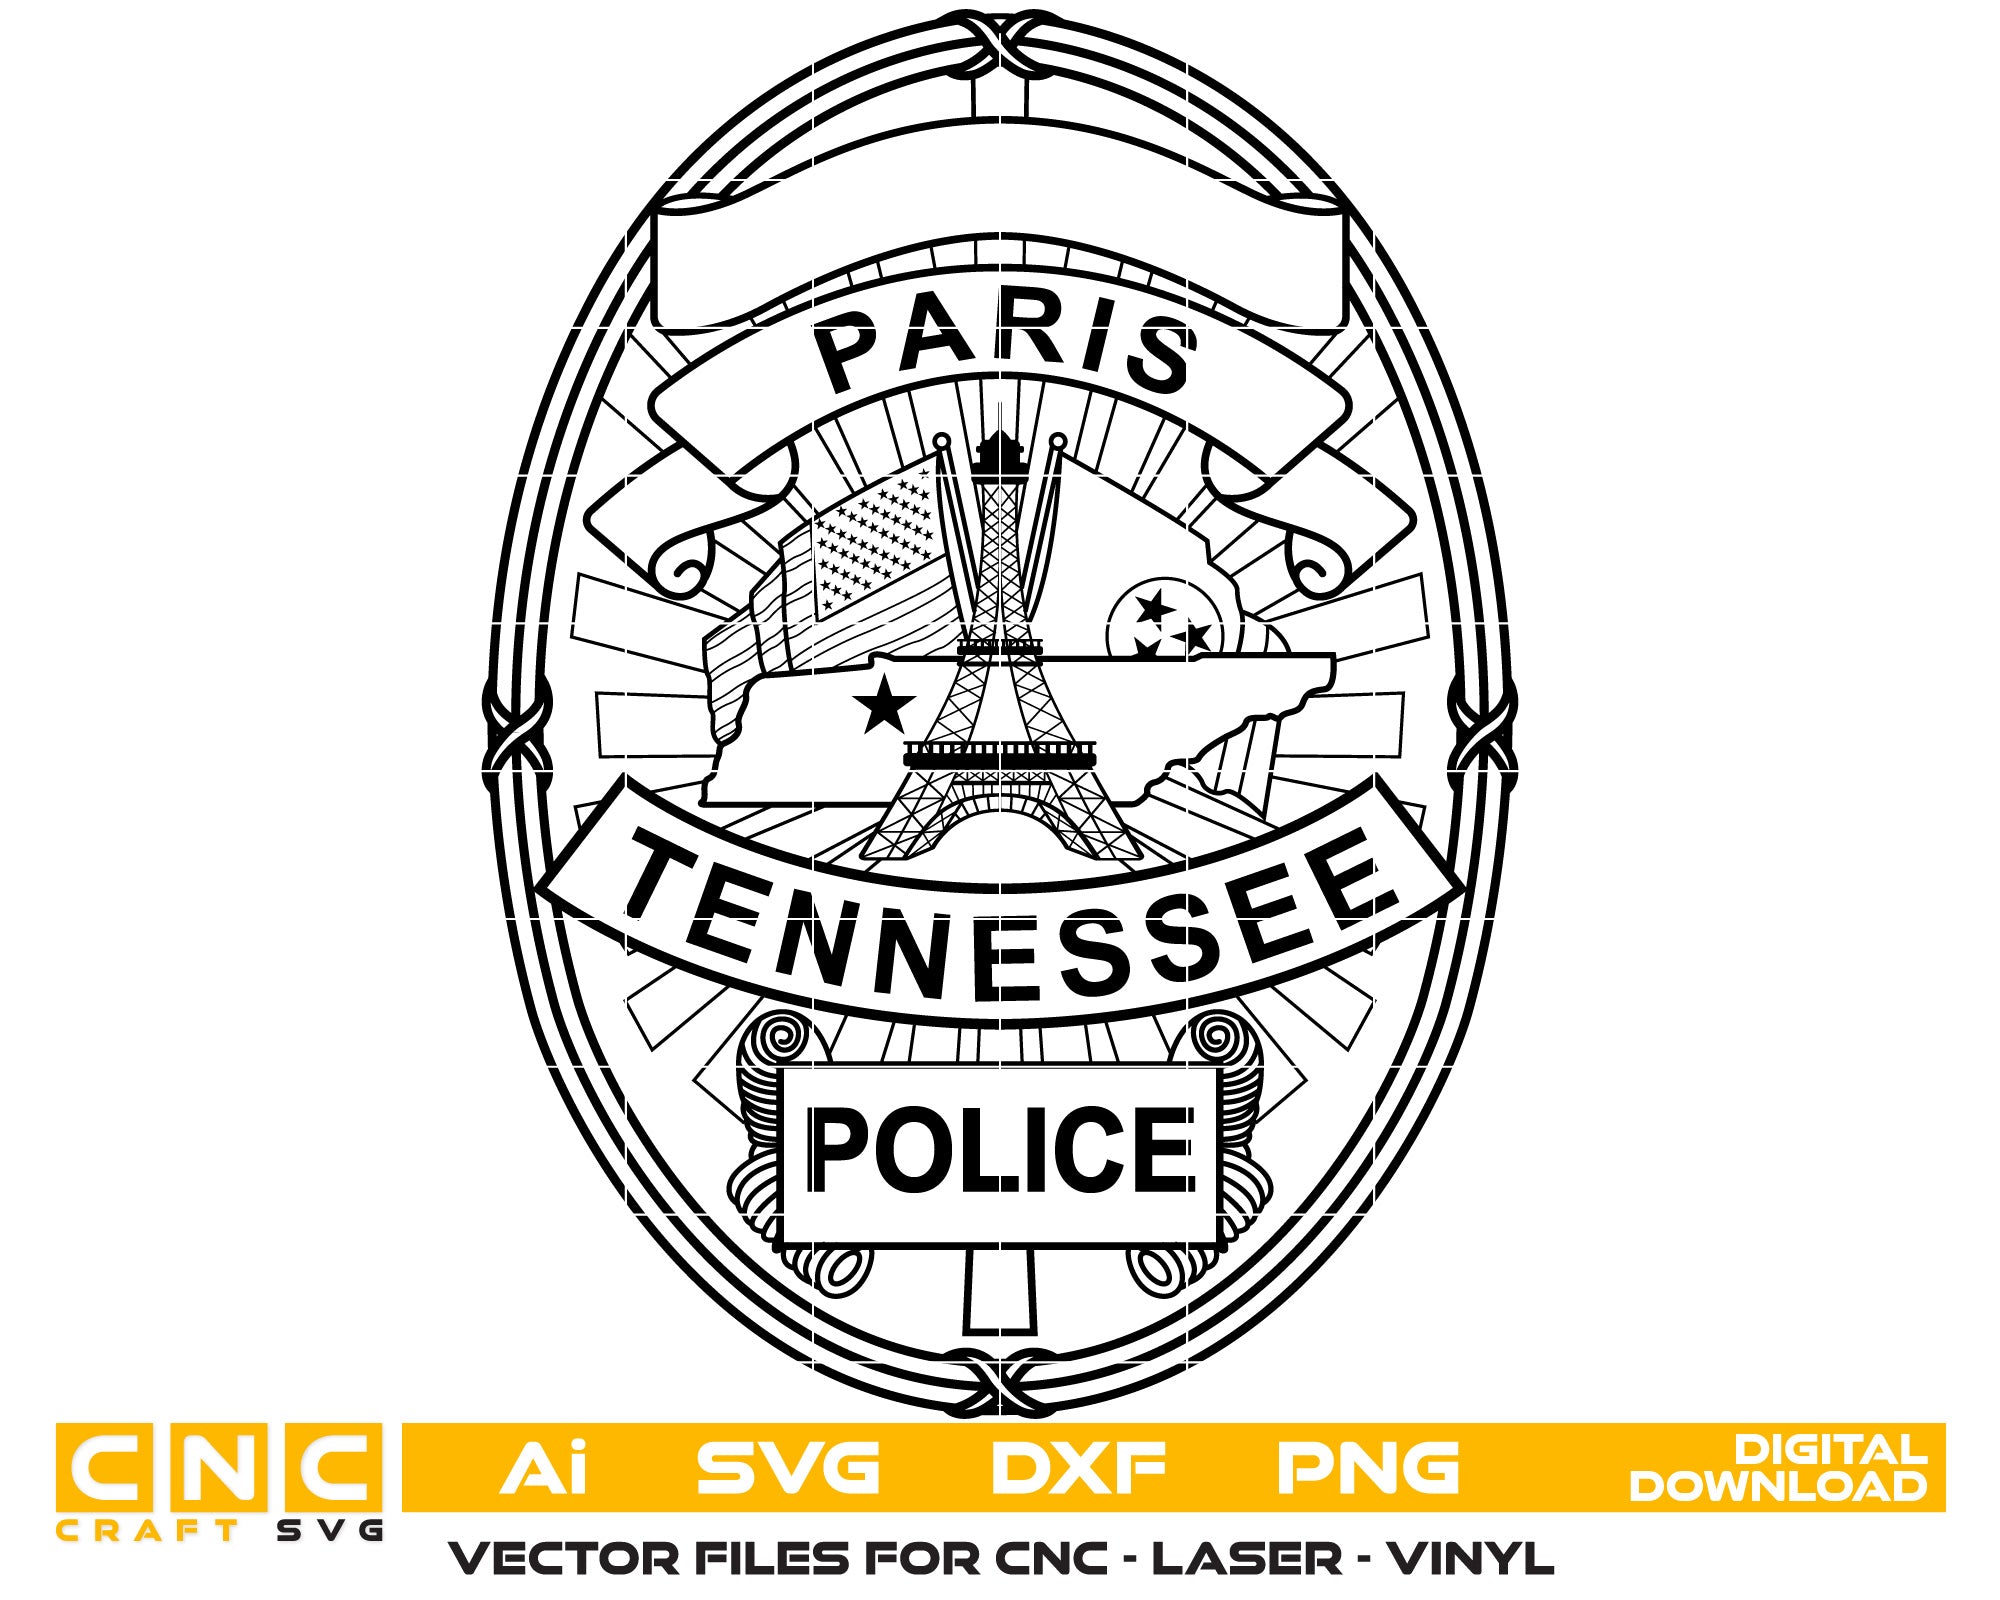 Paris Tennessee Police Vector Art, Ai,SVG, DXF, PNG, Digital Files